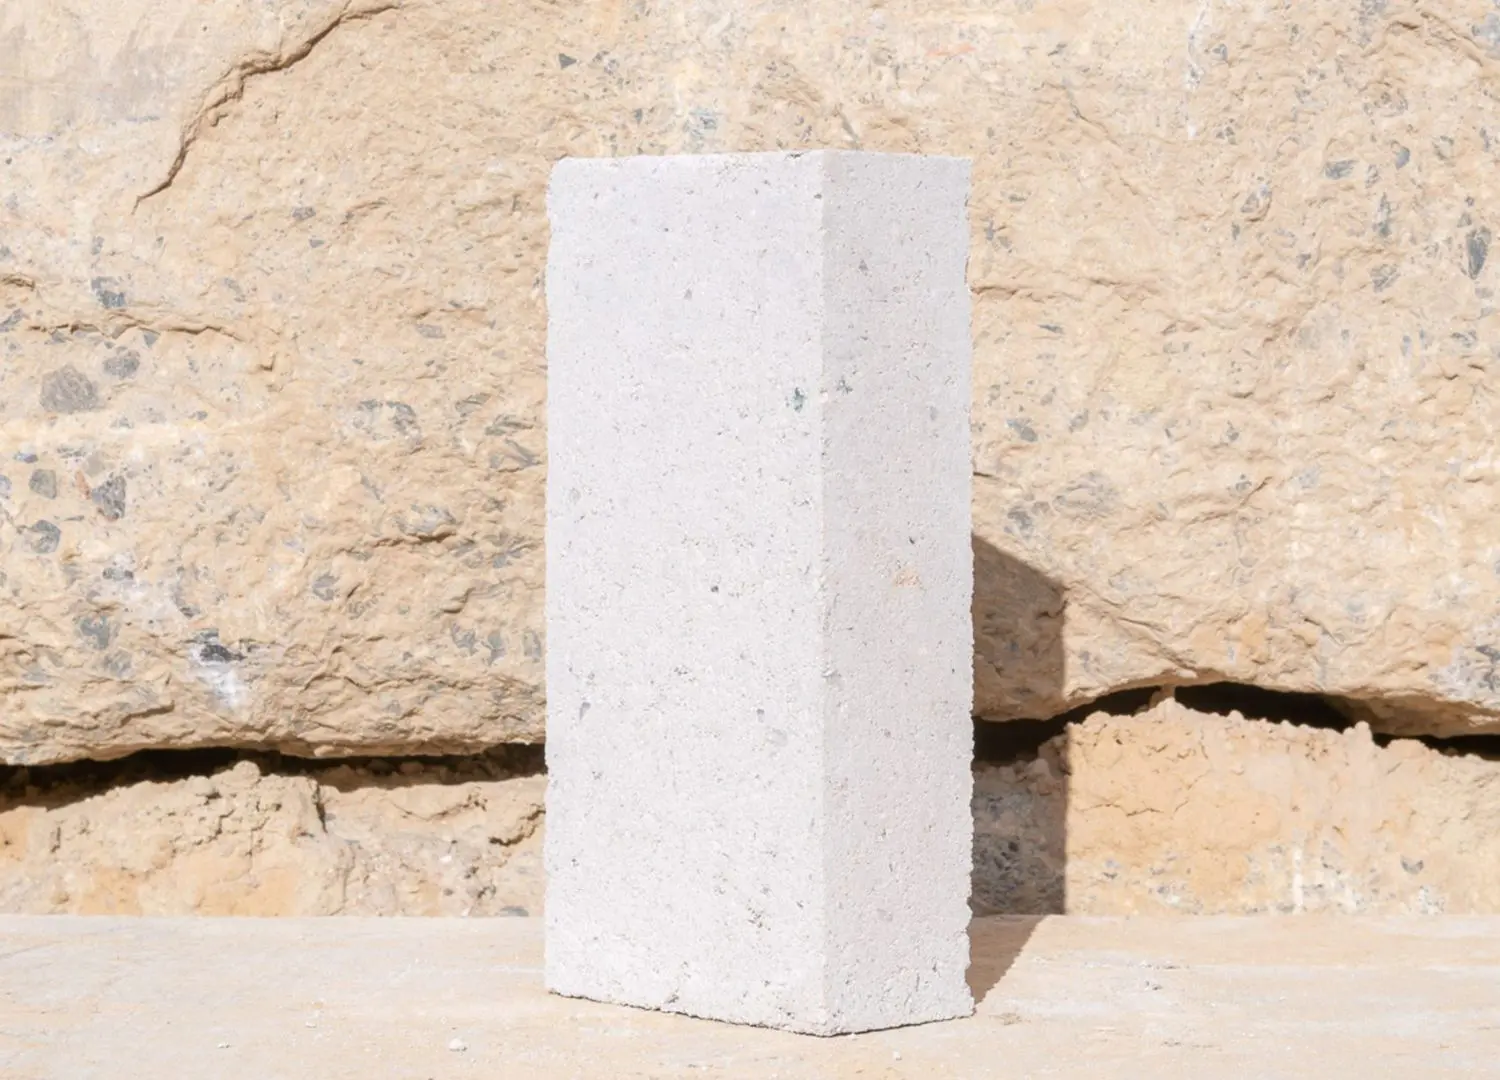 Gent Waste Brick - Material innovations aimed at reducing concrete's carbon footprint